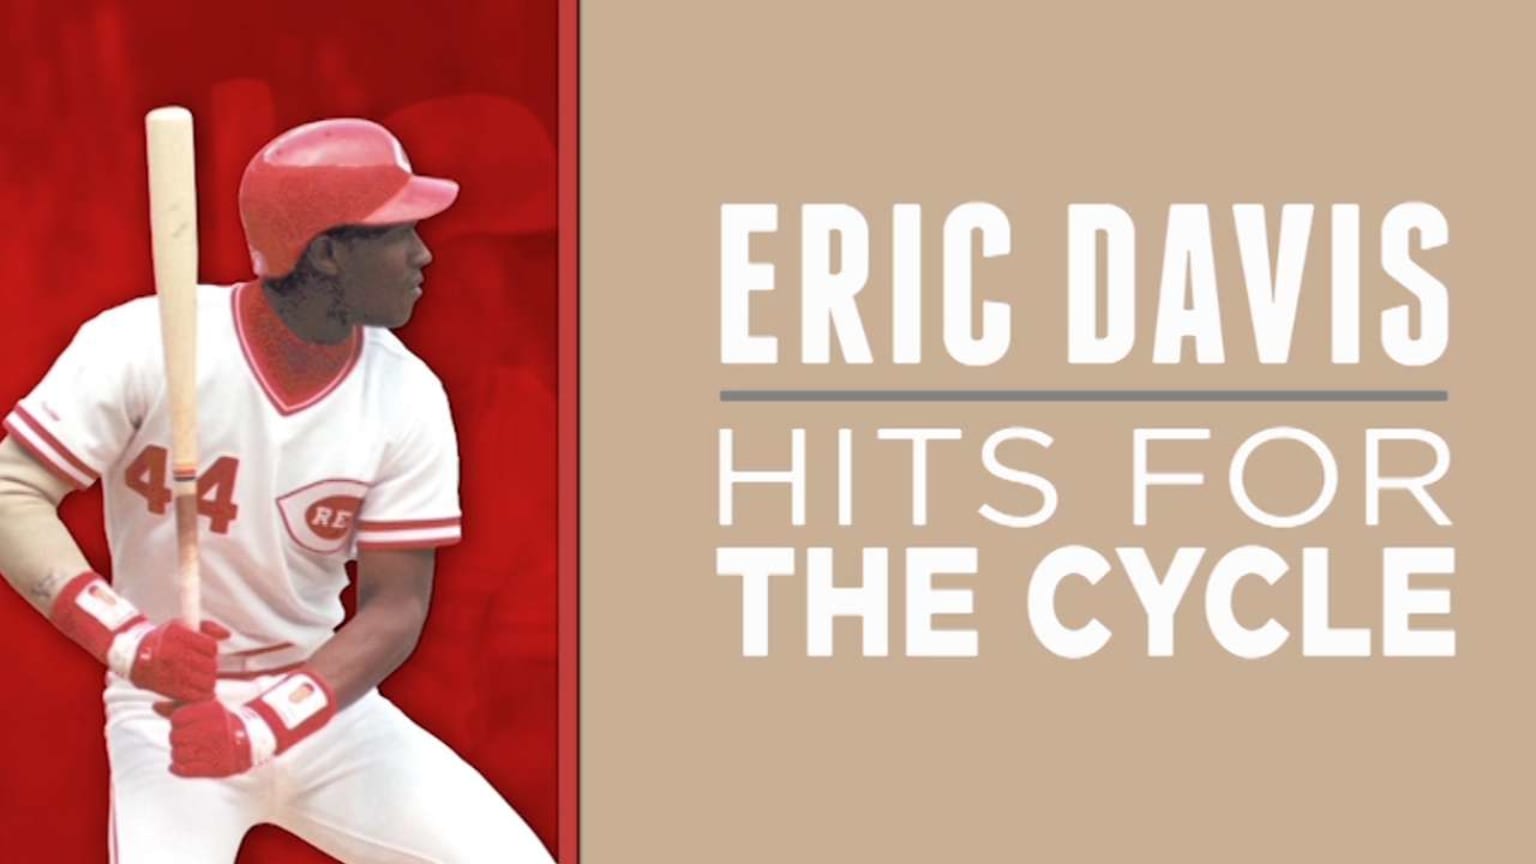 Eric Davis hits for the cycle 